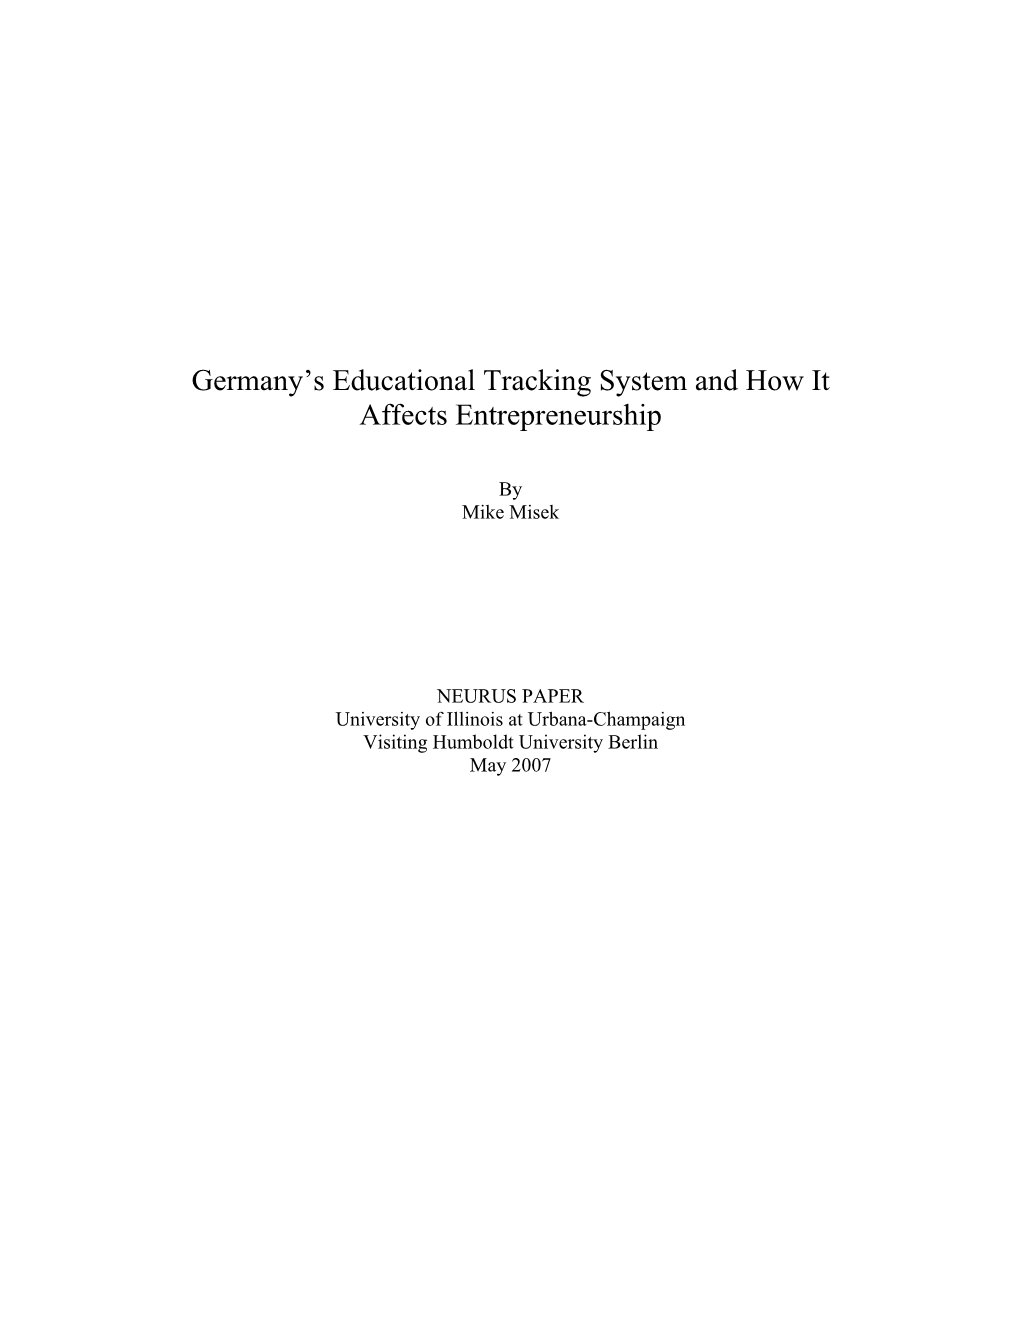 Germany's Educational Tracking System and How It Affects